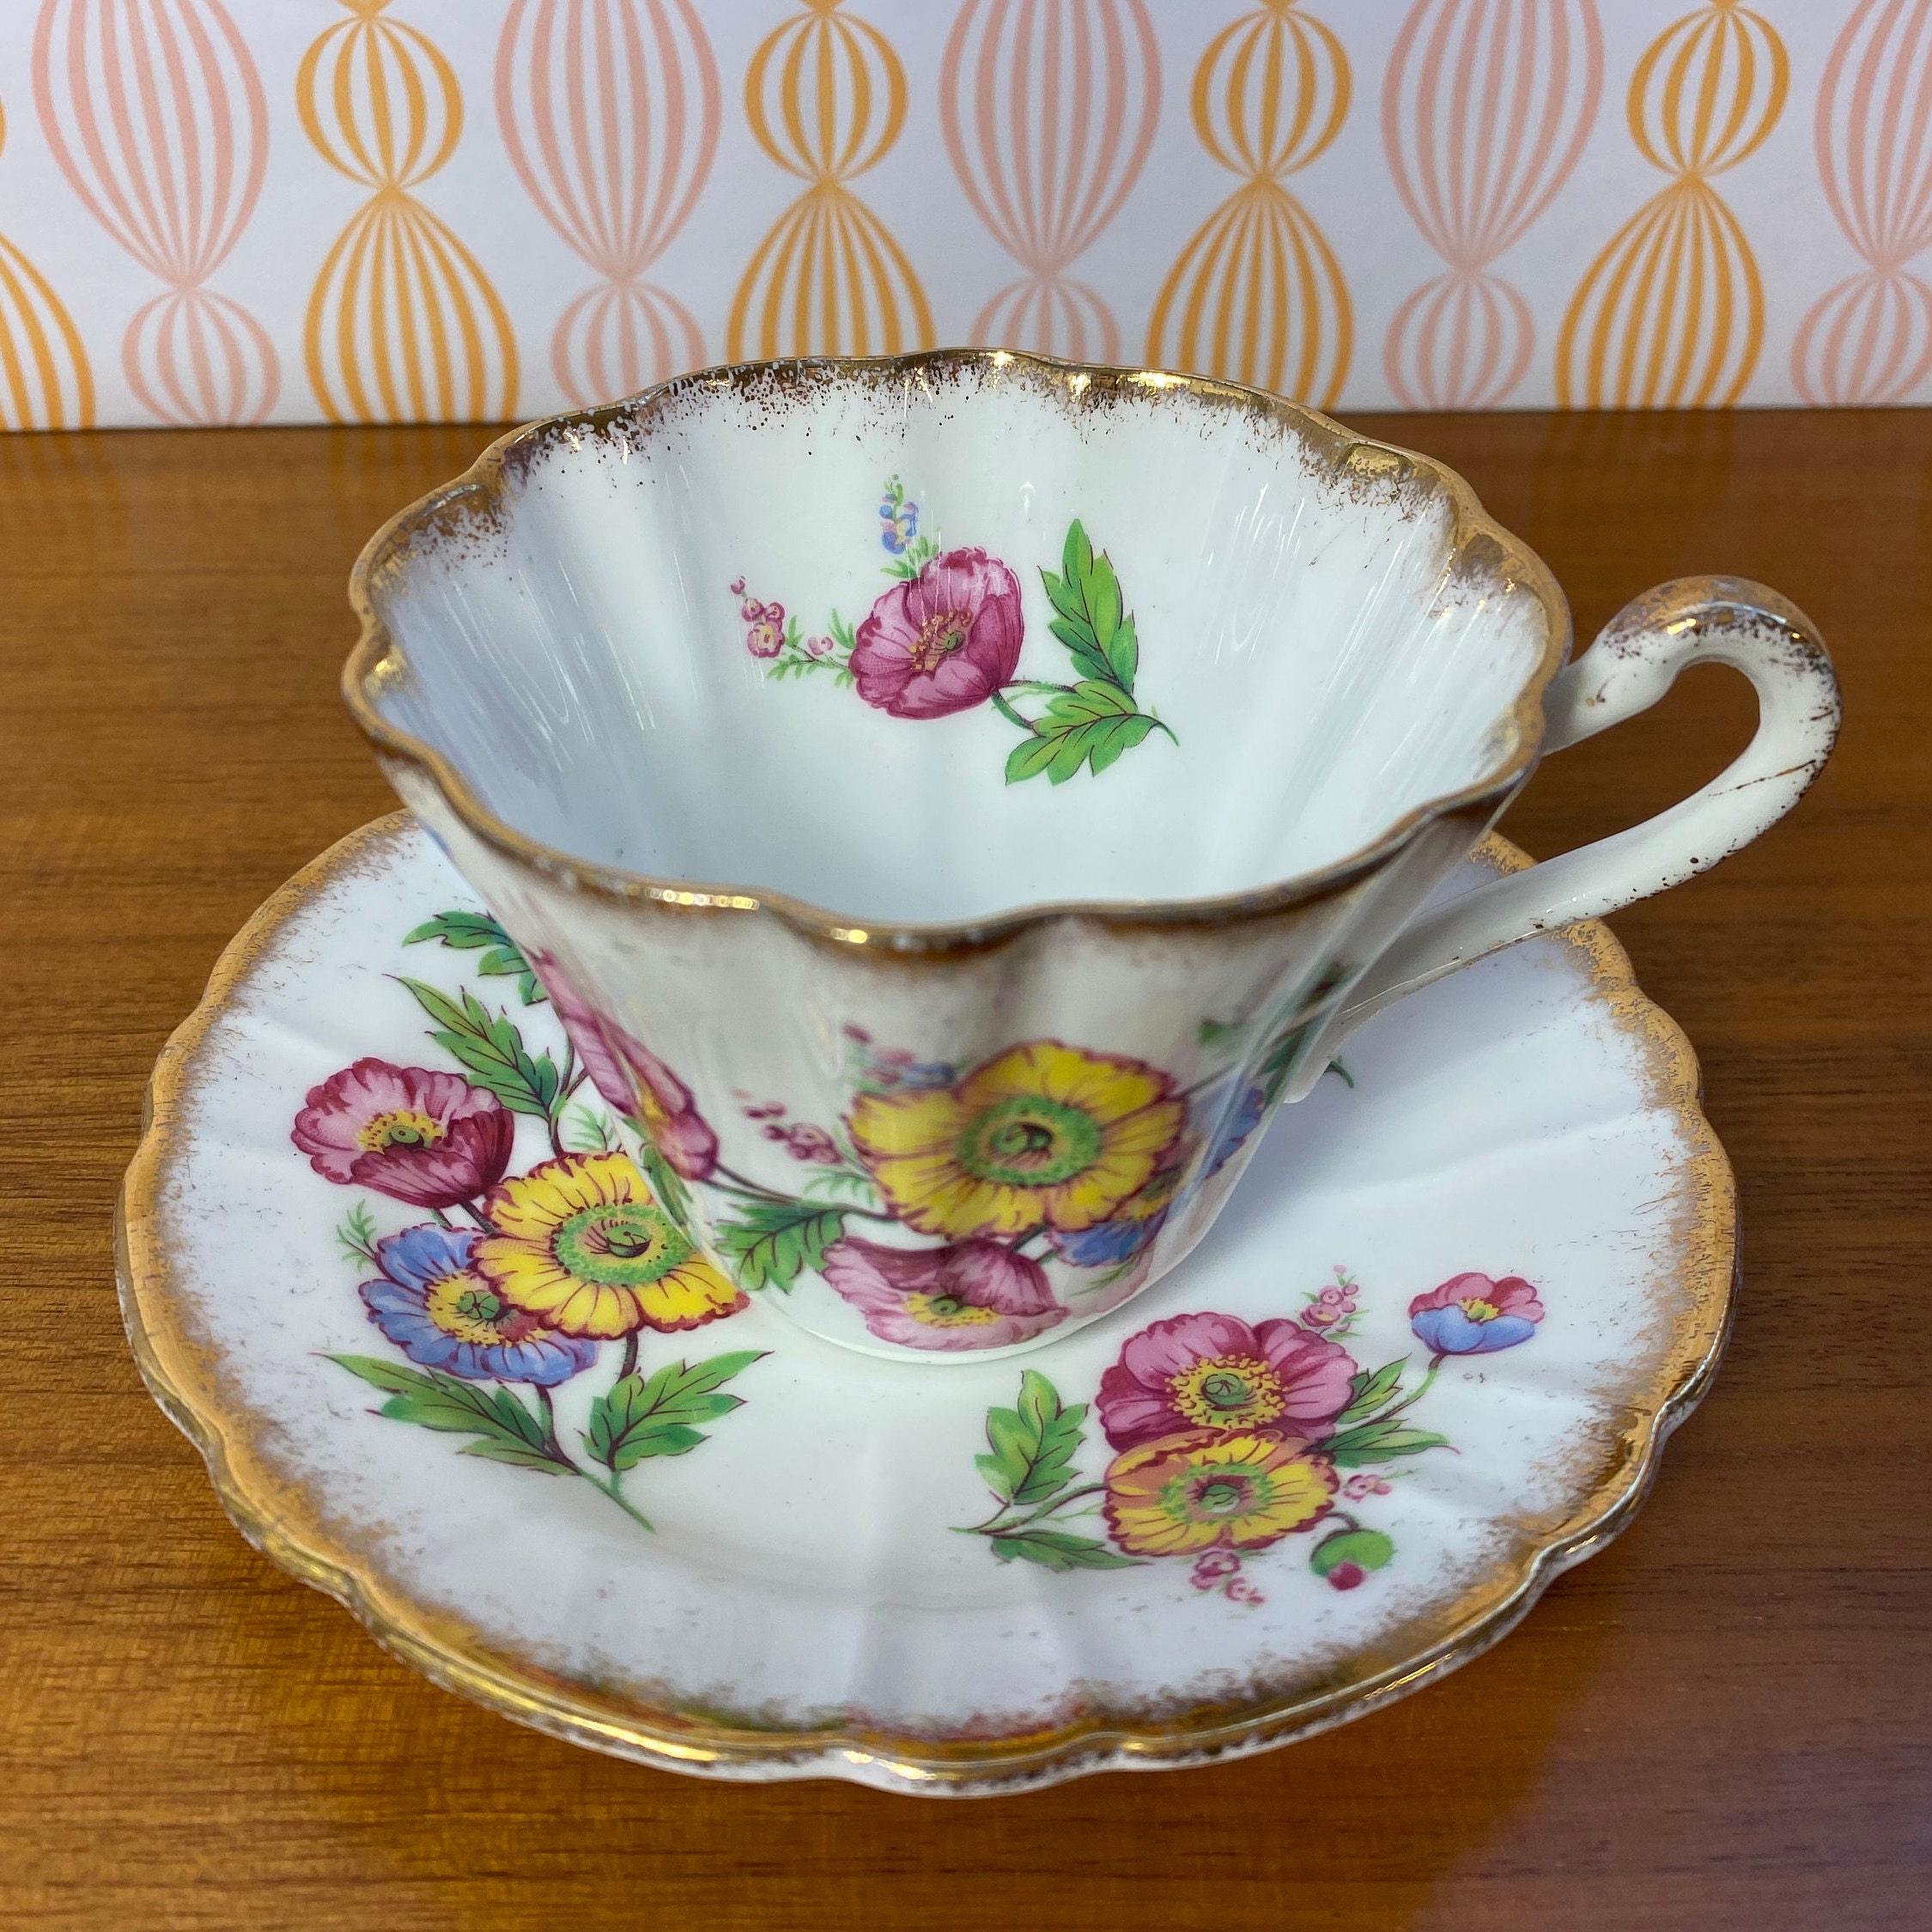 english bone china tea cup Gold Gilding Pink Floral Ornate Red Gladstone Teacup Shabby Chic Vintage Tea Cup tea lover gift